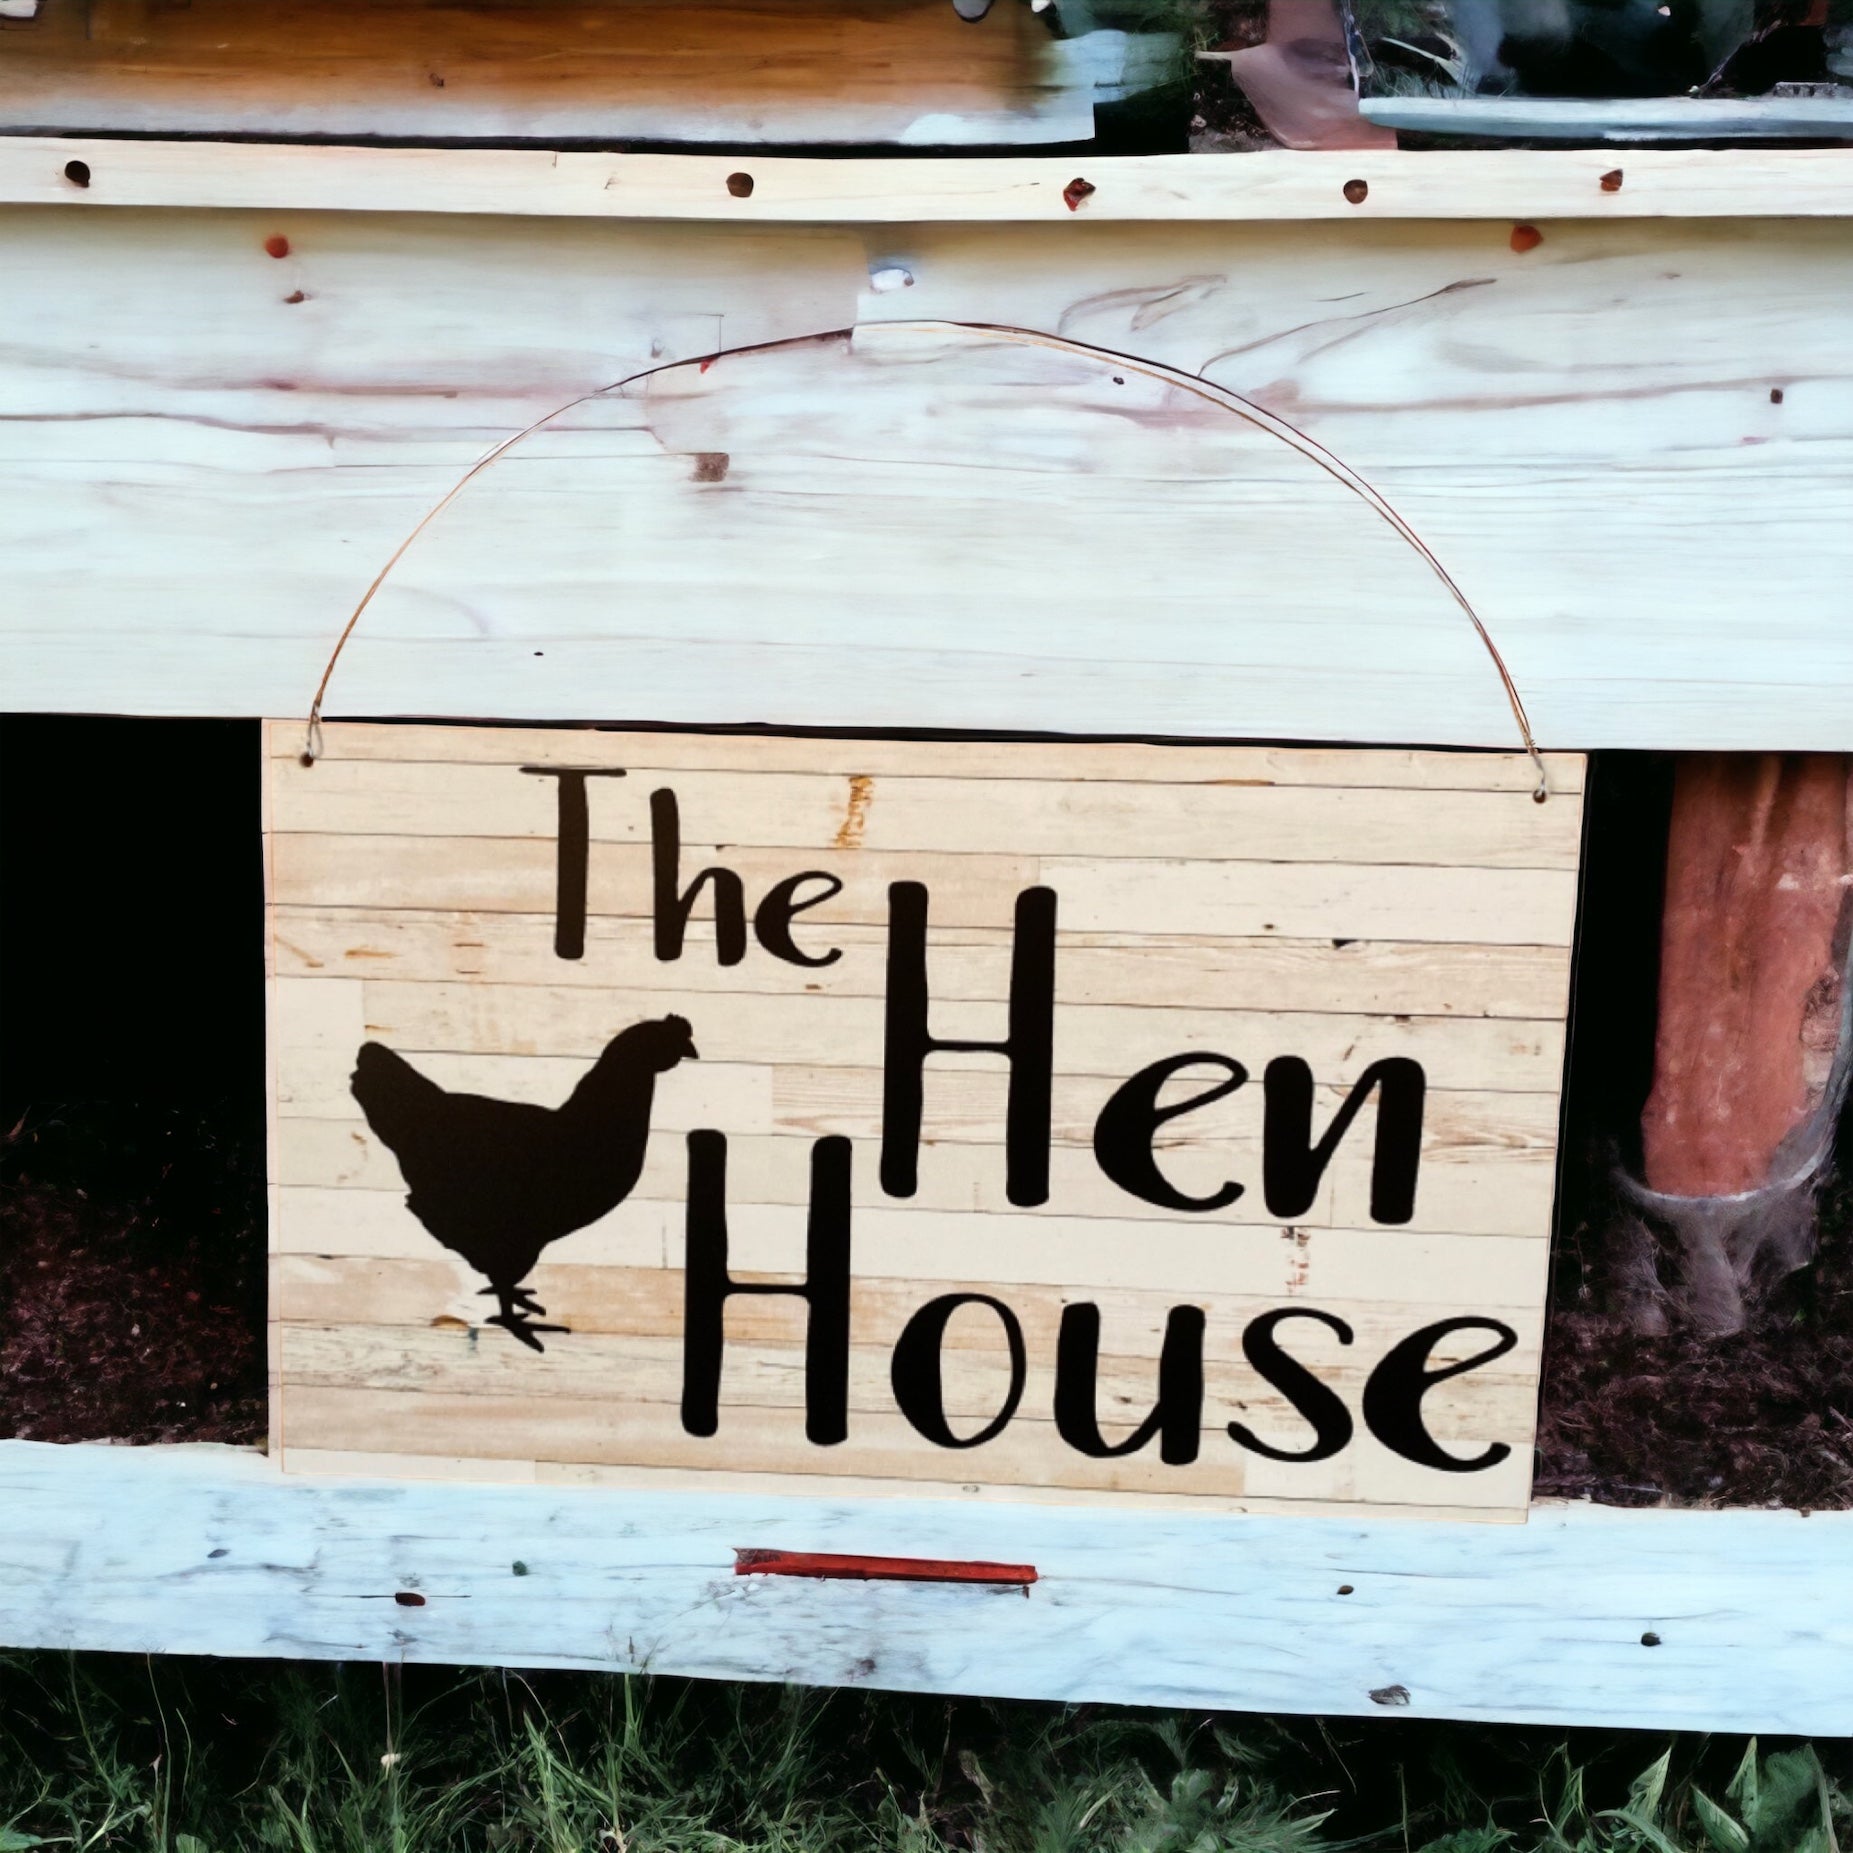 The Hen House Shabby Chic Sign - The Renmy Store Homewares & Gifts 